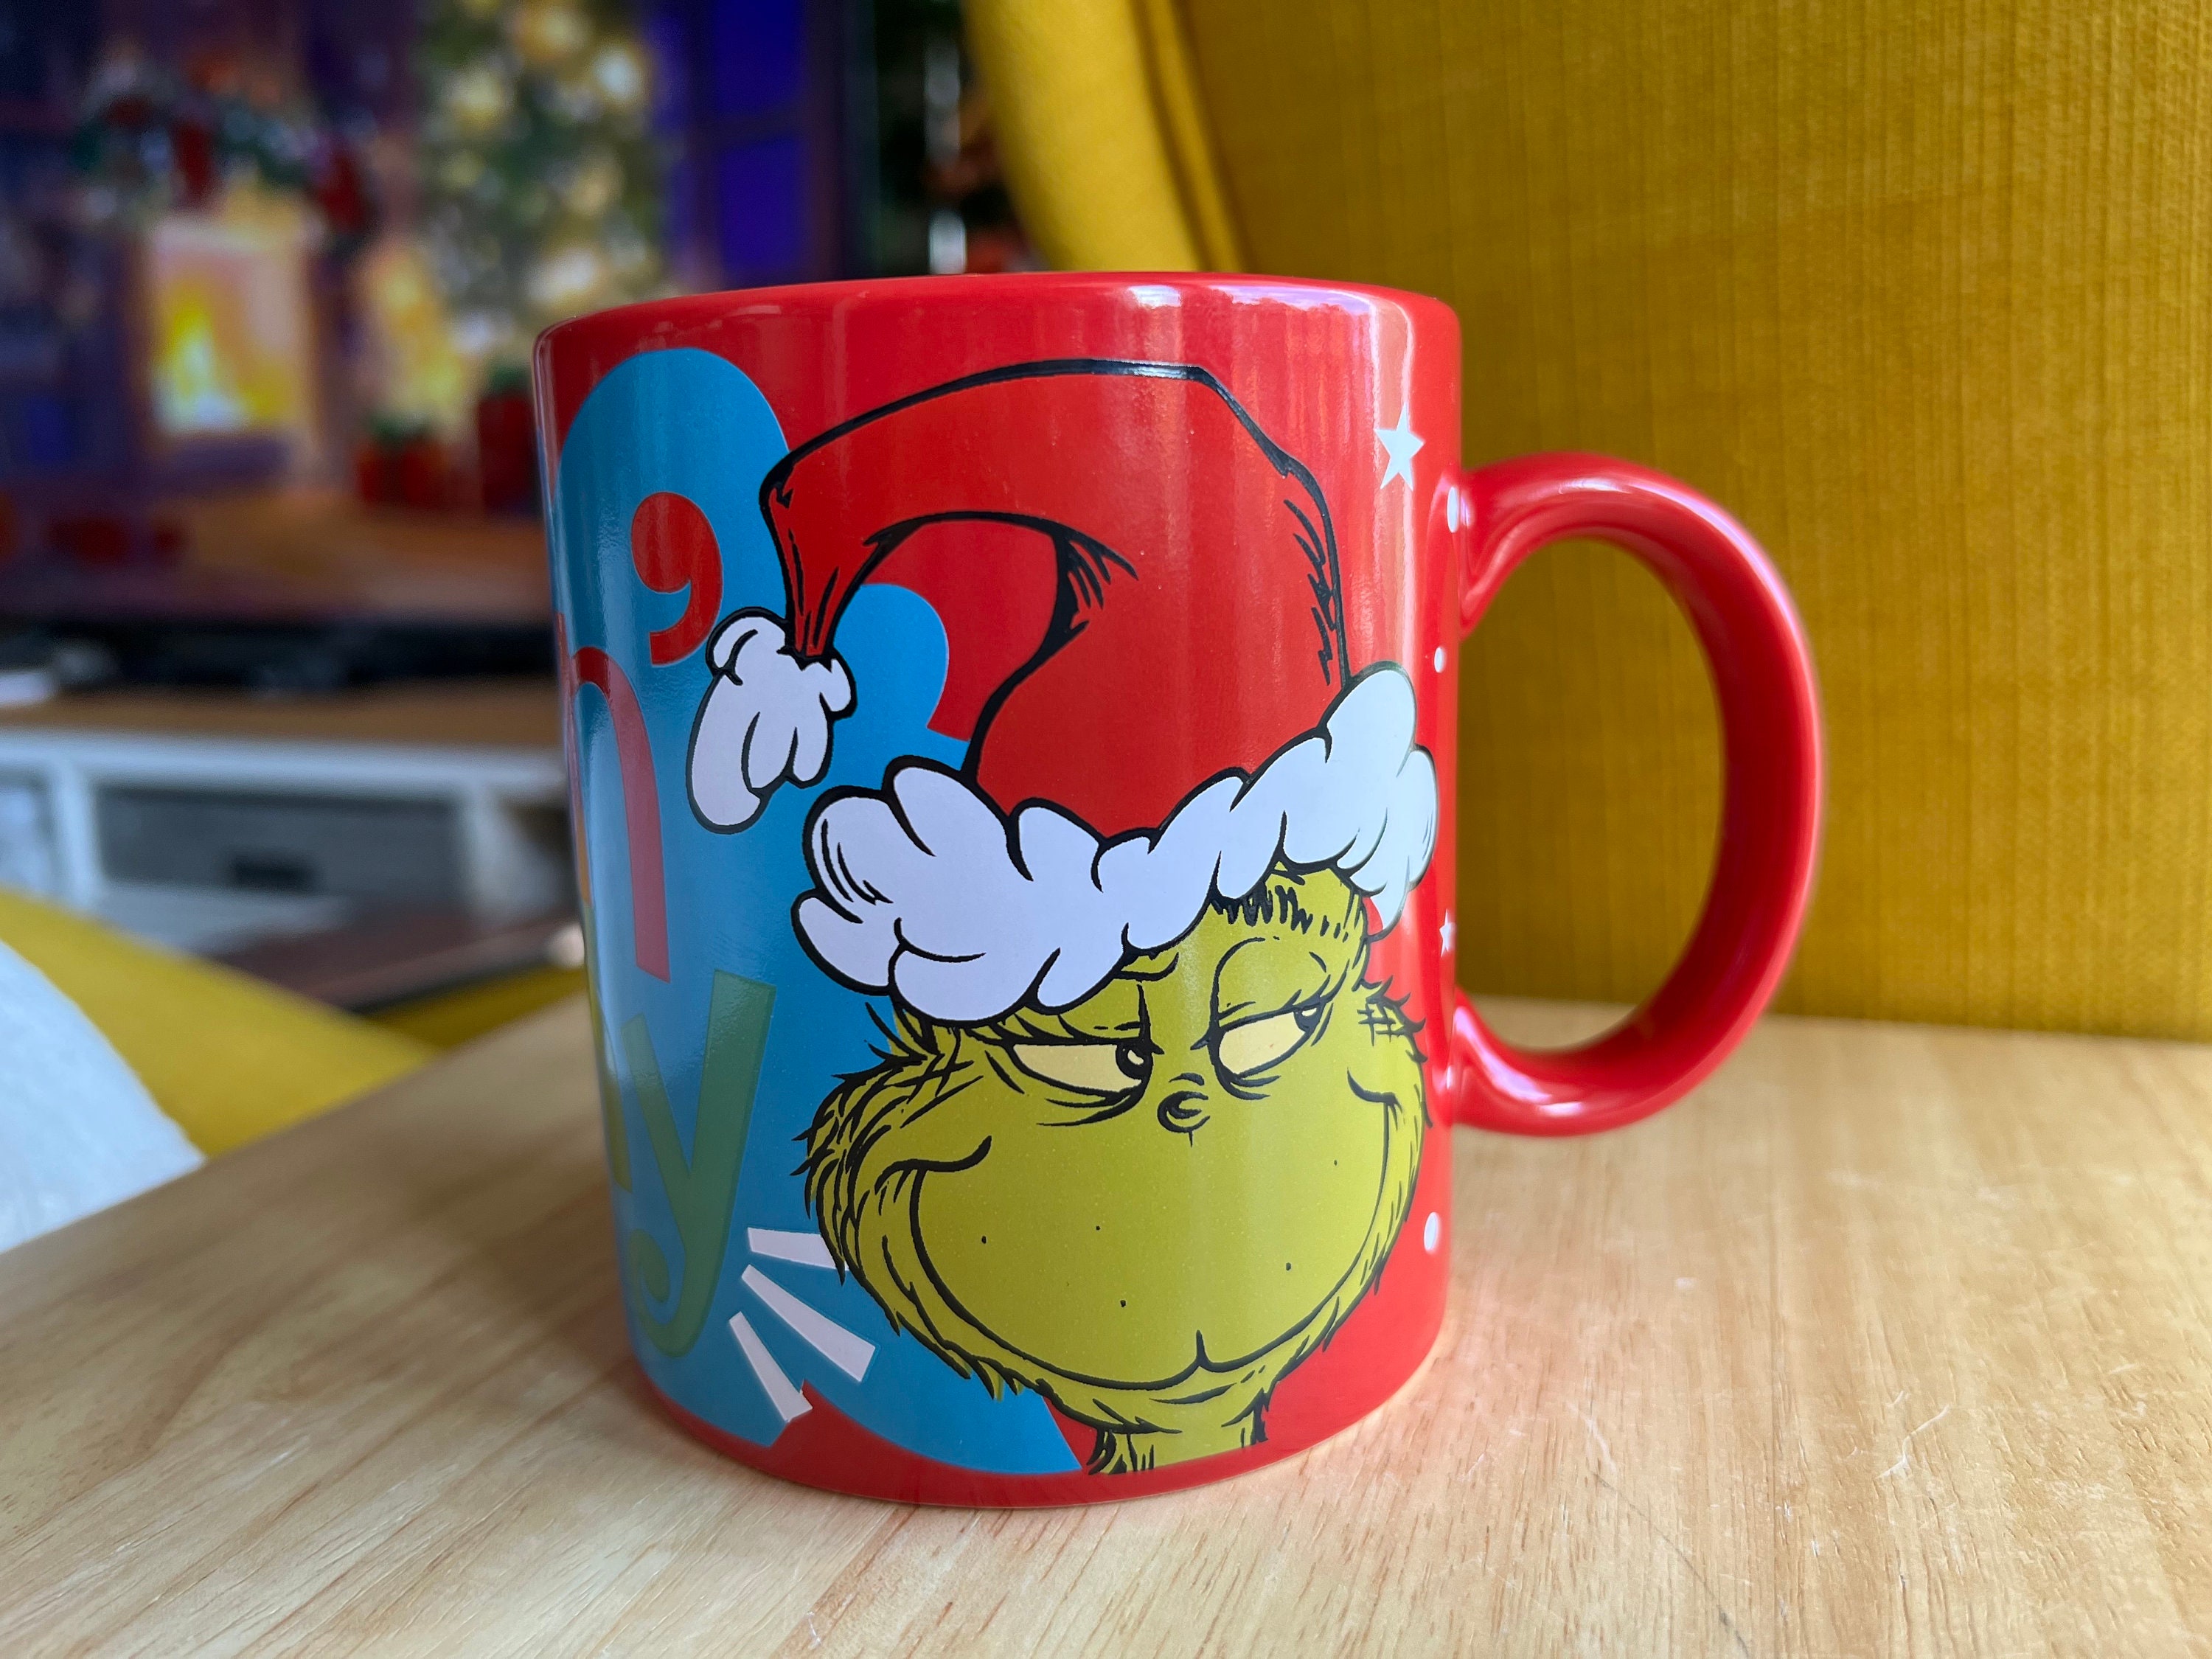 Dr. Seuss The Grinch Naughty or Nice Plastic 16 oz. Travel Cup with Straw